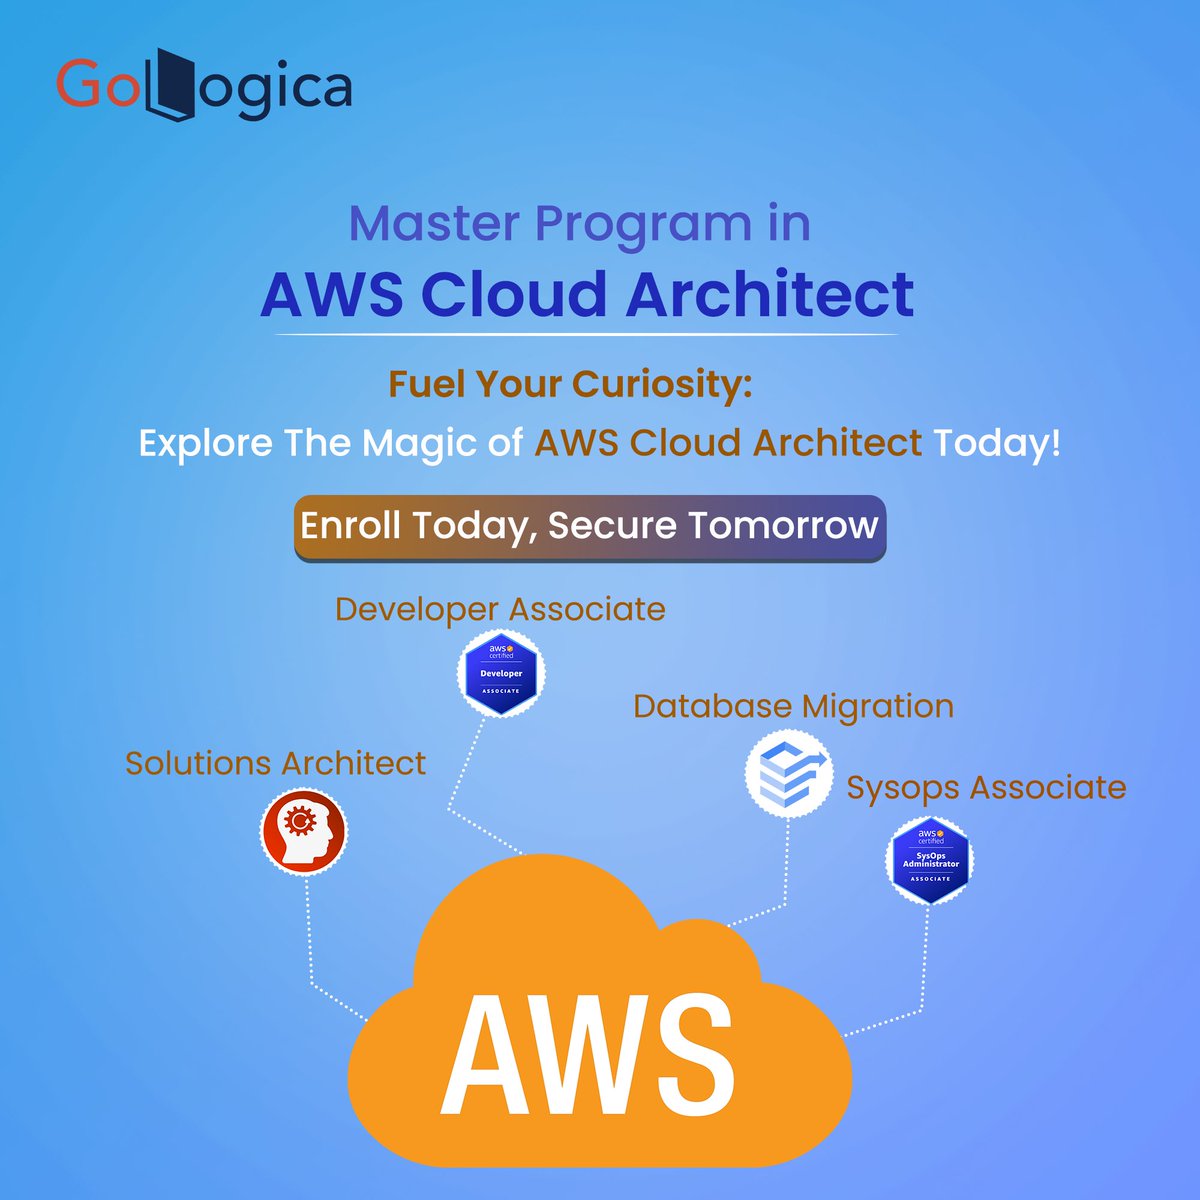 Elevate your career with our GoLogica comprehensive AWS Cloud Architect Master Program! 
#AWS #CloudArchitect #CareerGrowth #GoLogicaTraining #GoLogica #awscloud #awsarchitecture #wellarchitected #awslambda #dynamodb #s3 #dynamodb #cloudformation #serverless #security